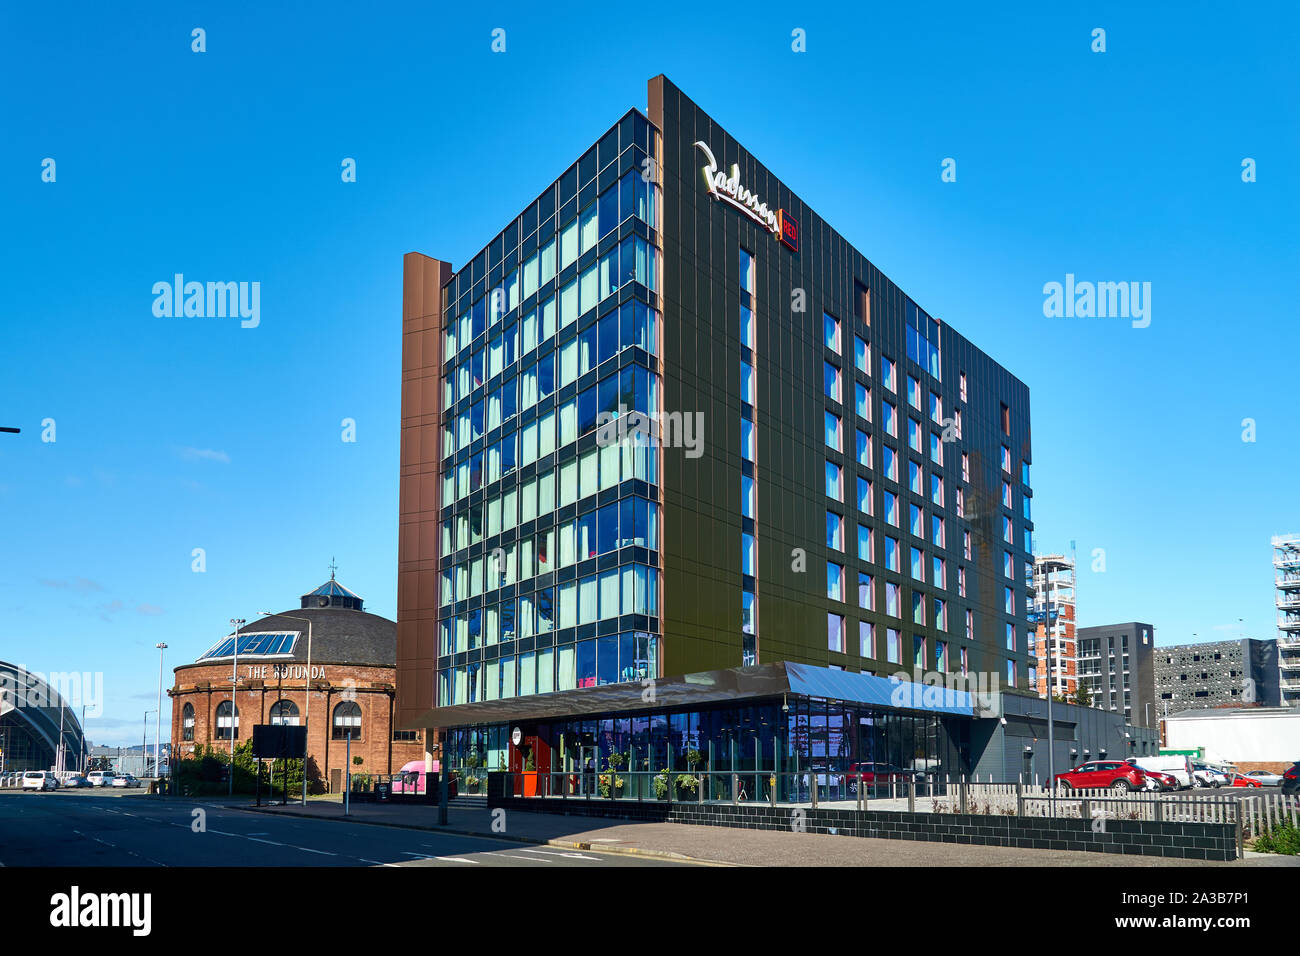 Radisson RED hotel in Glasgow City, near the River Clyde. Stock Photo